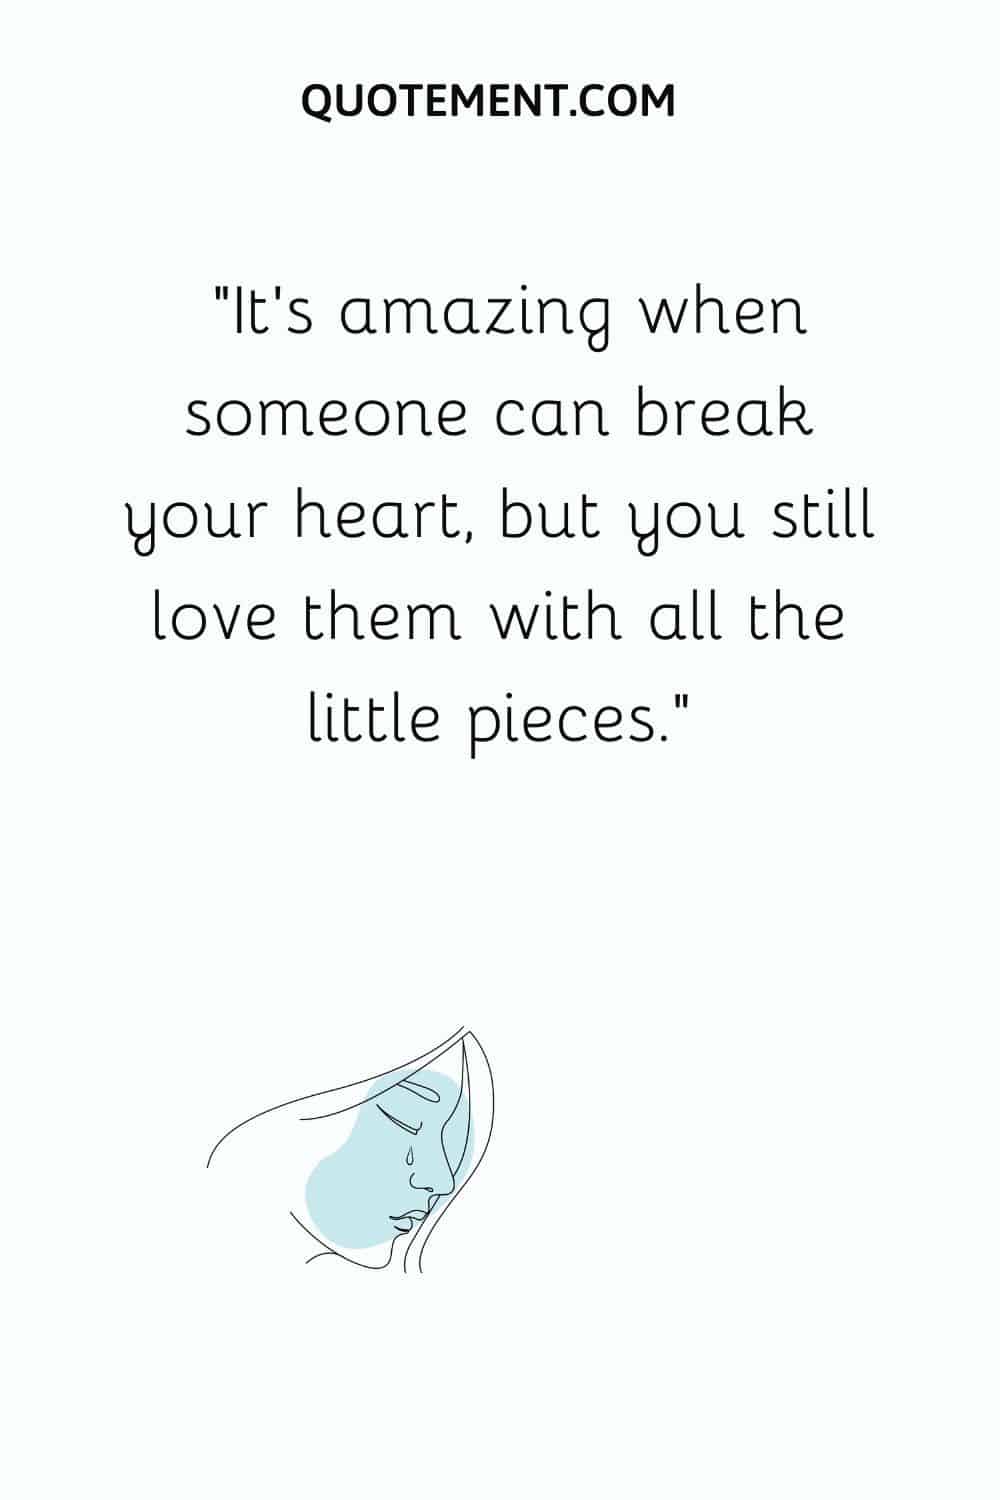 It’s amazing when someone can break your heart, but you still love them with all the little pieces